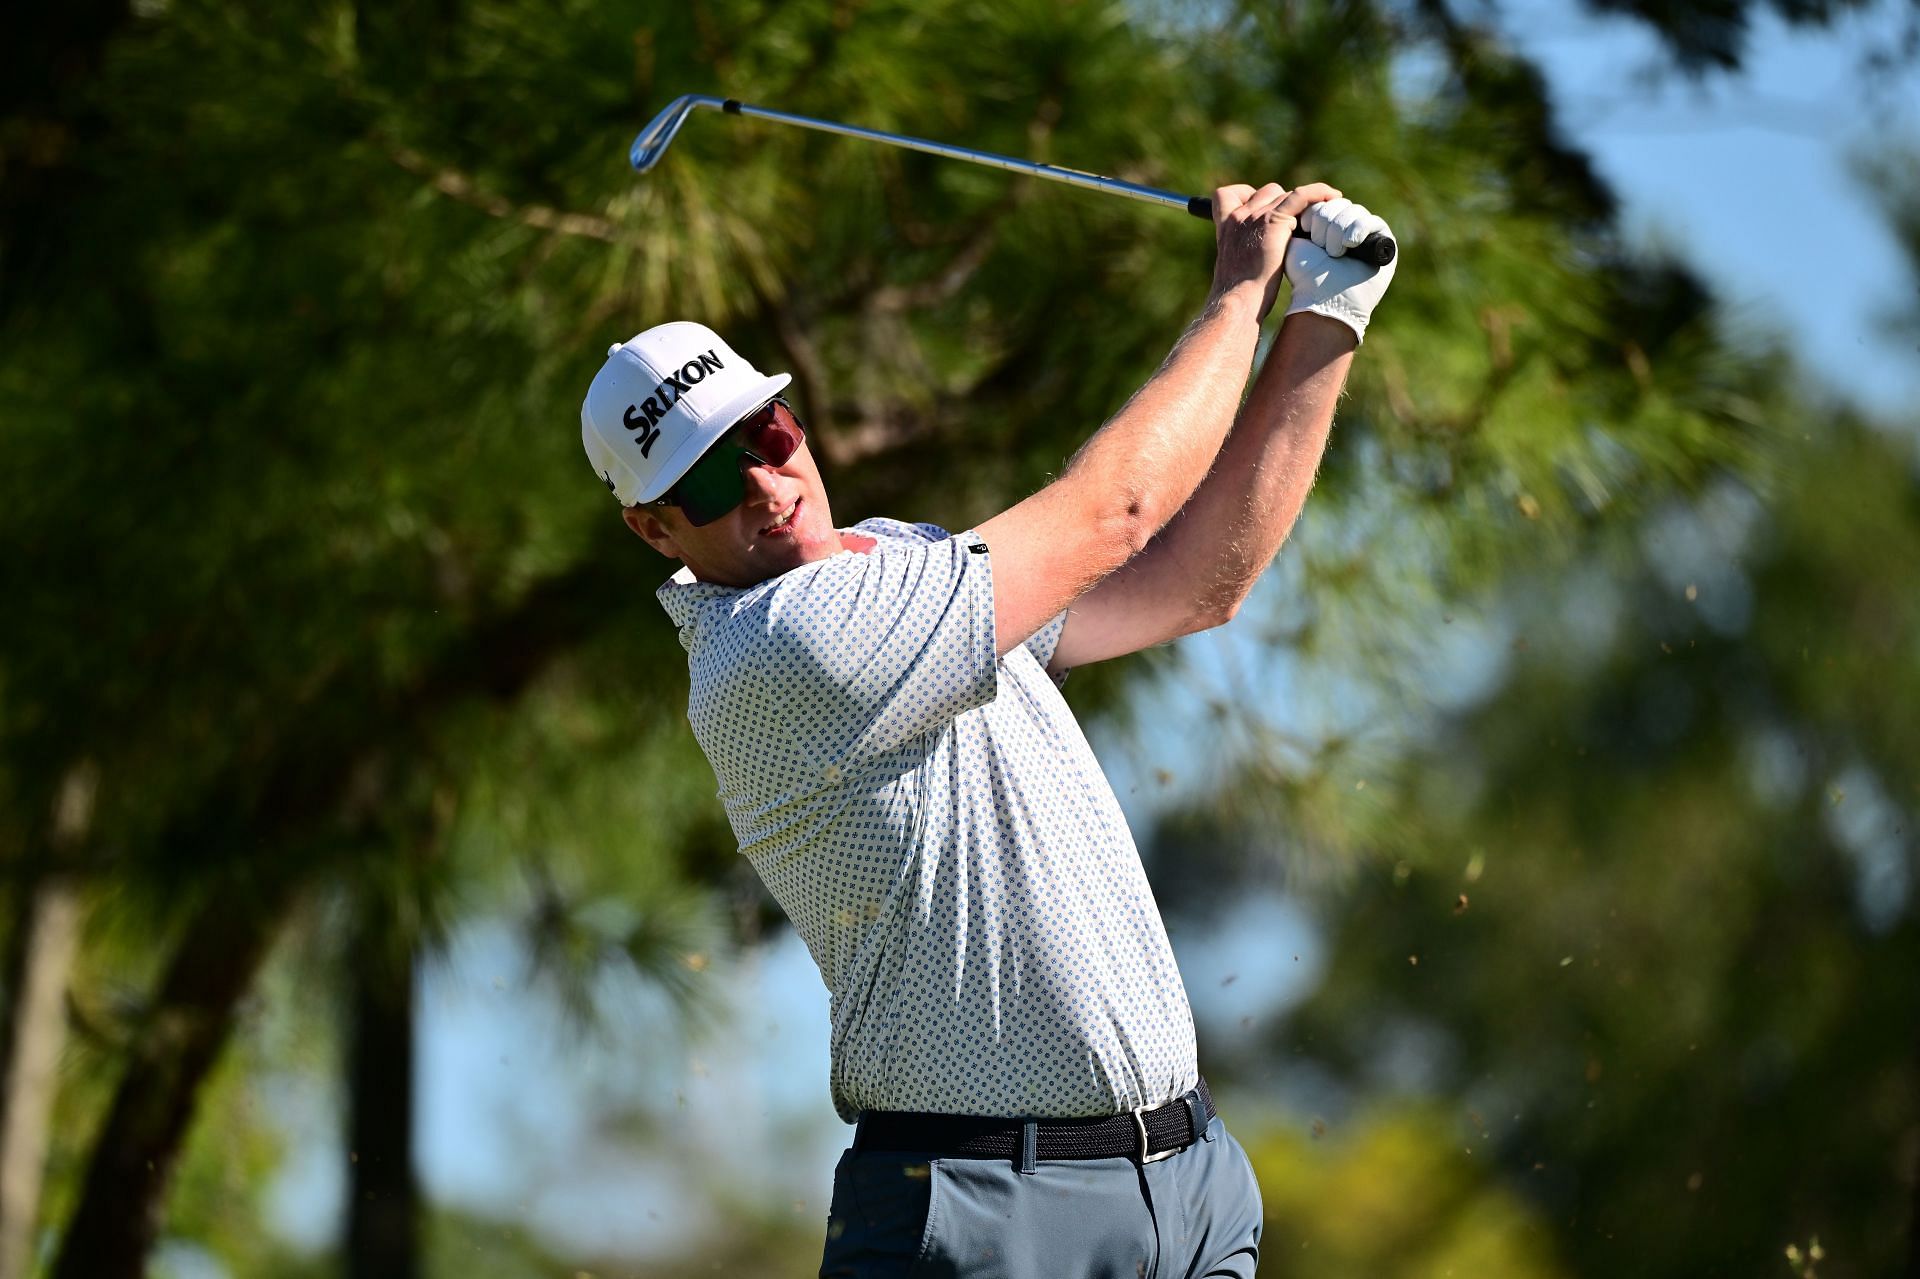 Ryan Brehm leads at the Valspar Championship after the conclusion of the first round